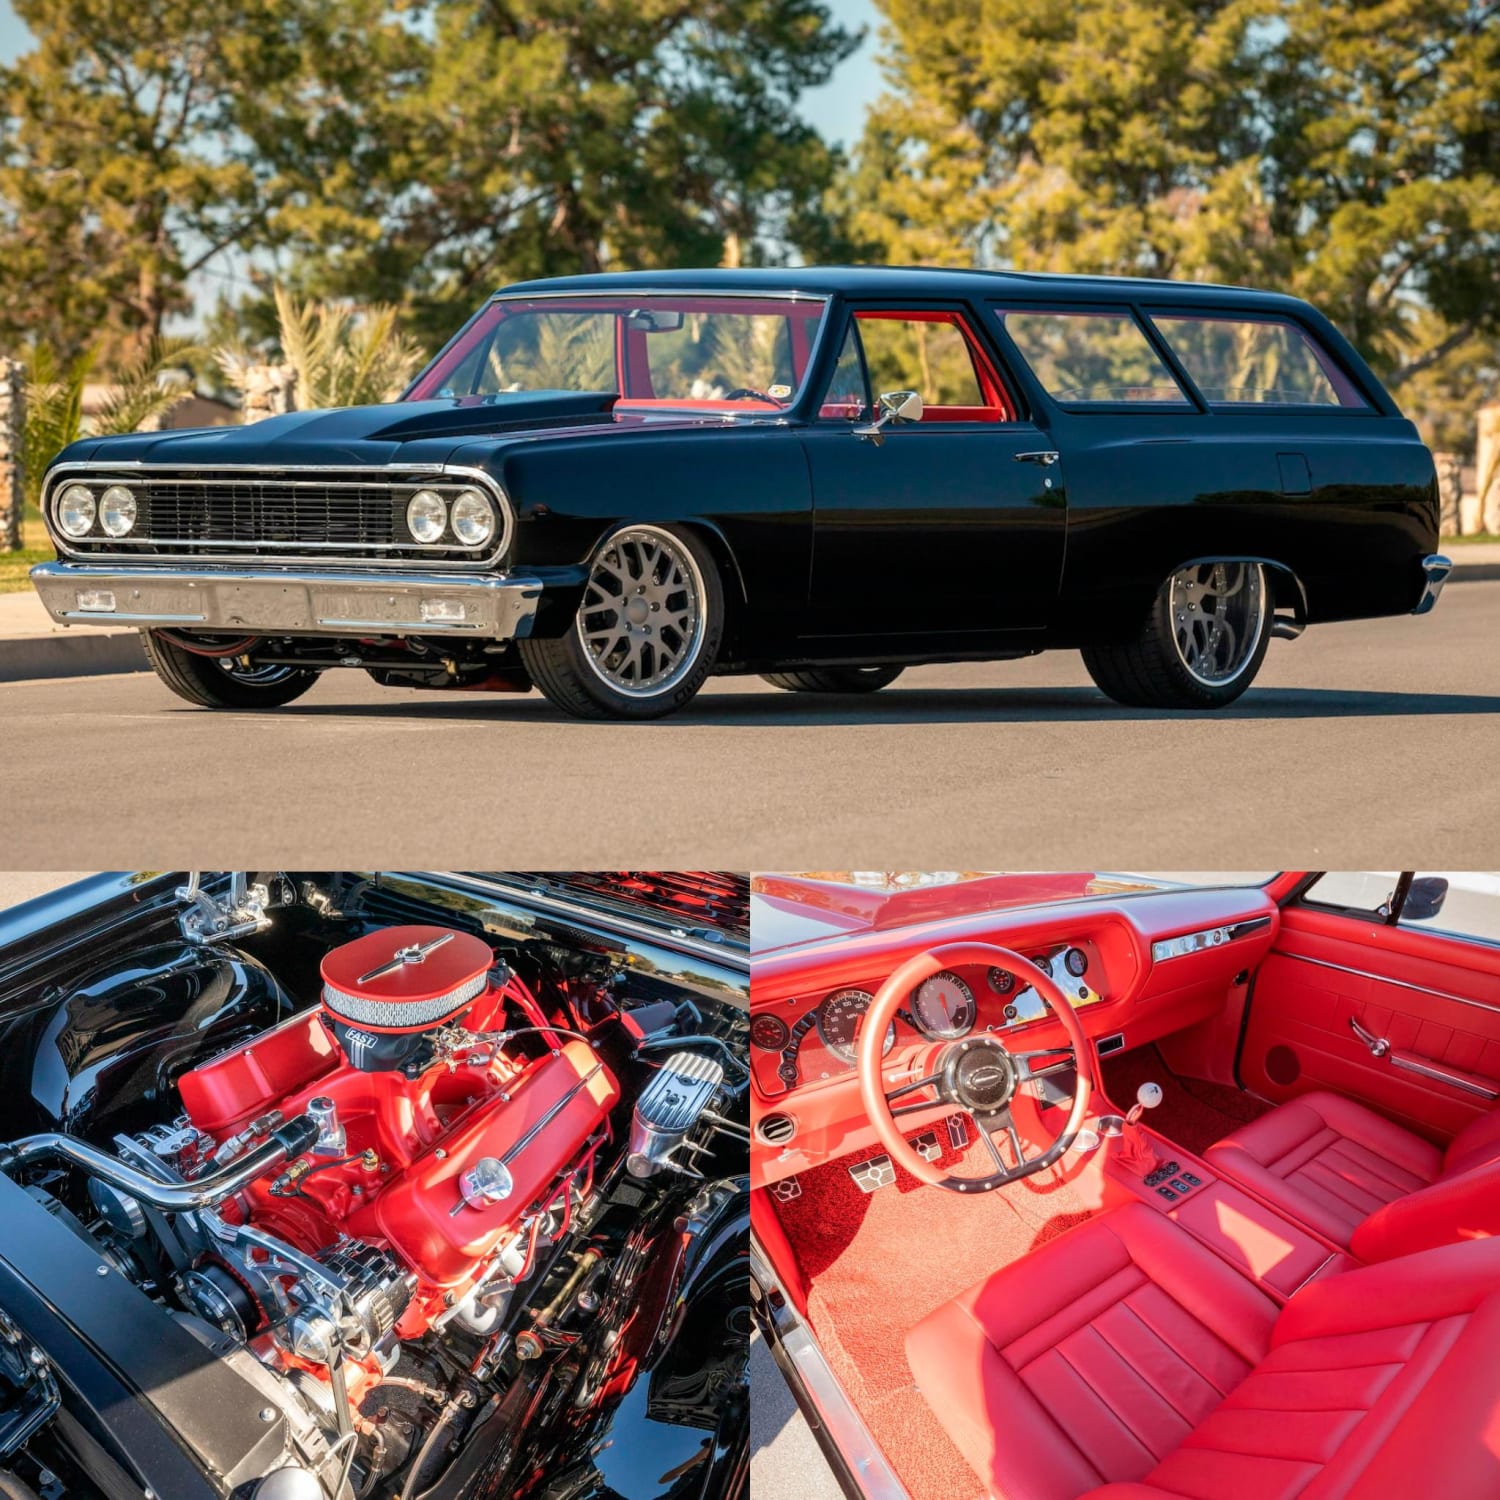 1964 Chevy Chevelle Wagon. 496ci/600hp BB Chevy, Tremec 5spd manual trans and FAB 9in diff on a custom Pro Touring chassis.